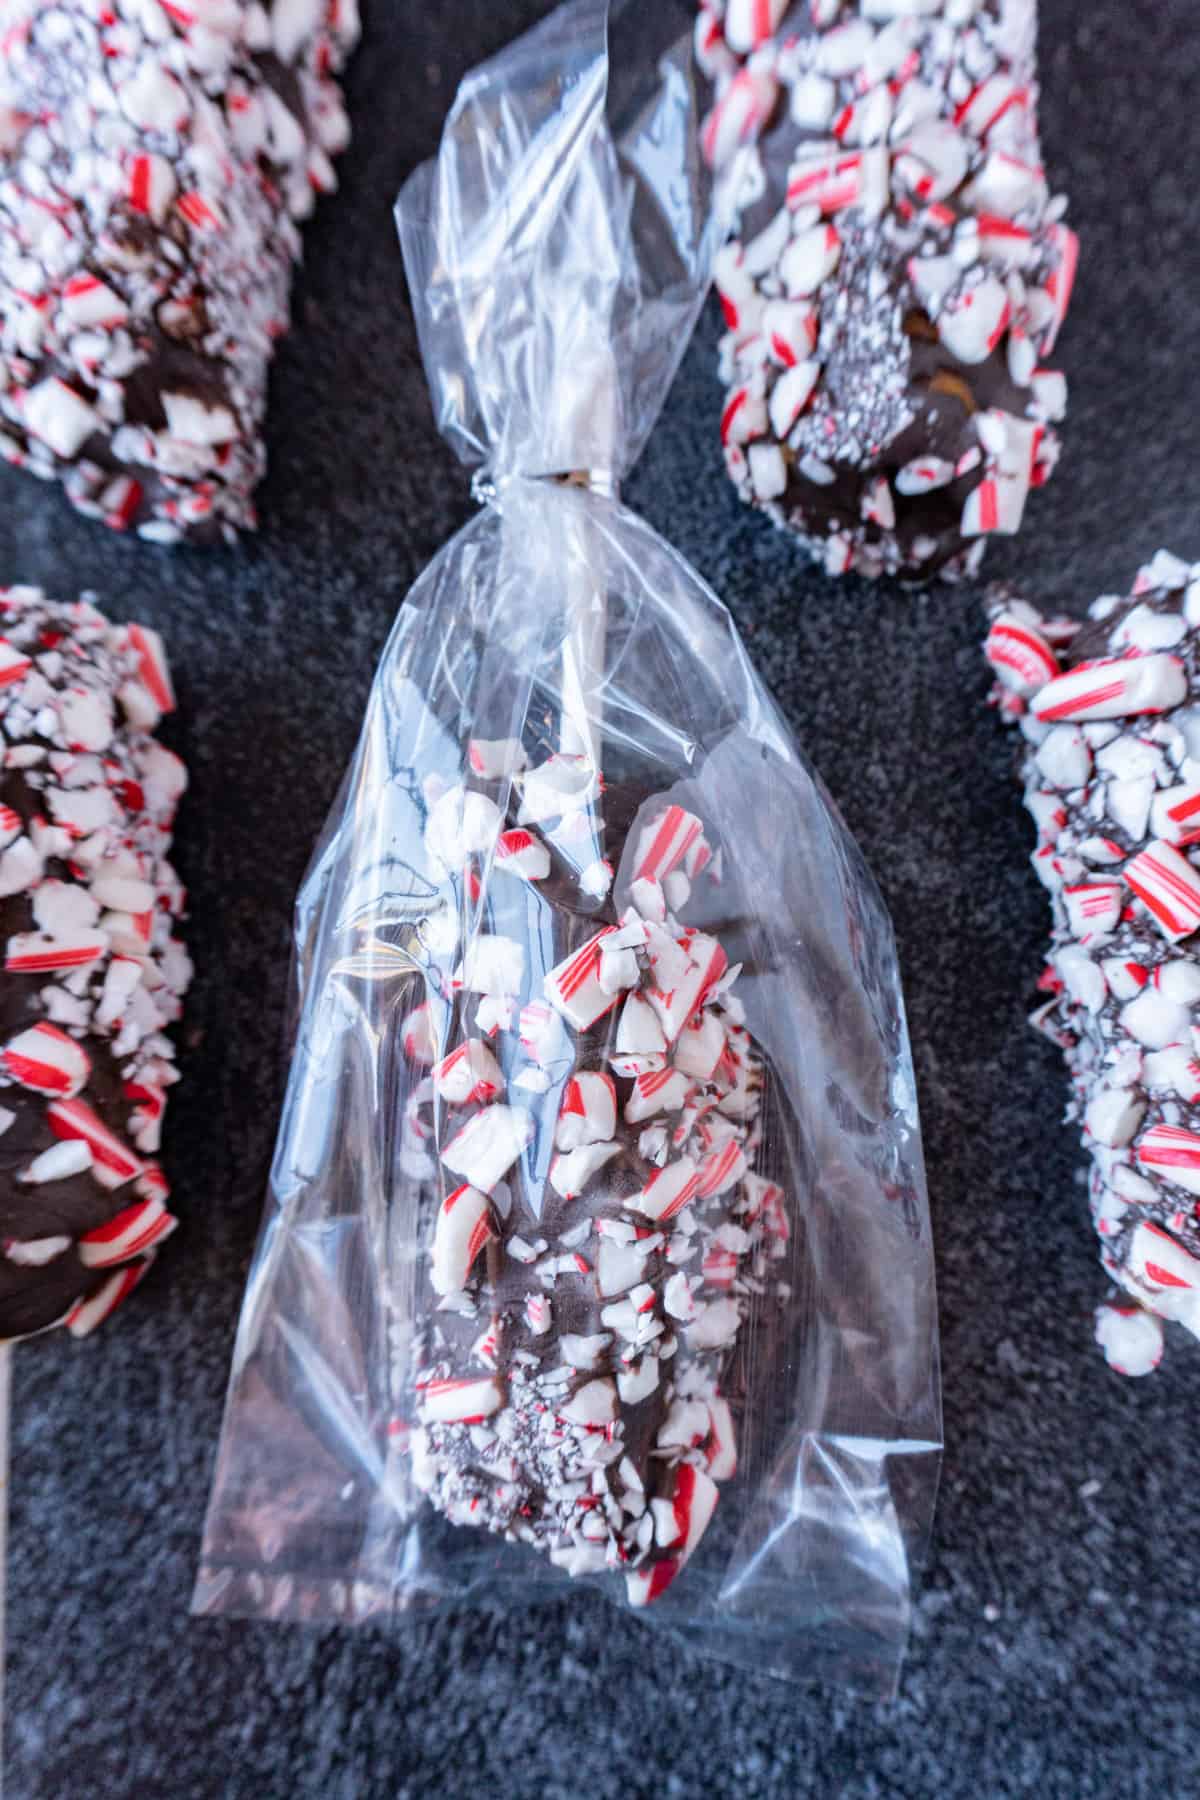 Peppermint Marshmallow Wand in a gift baggie